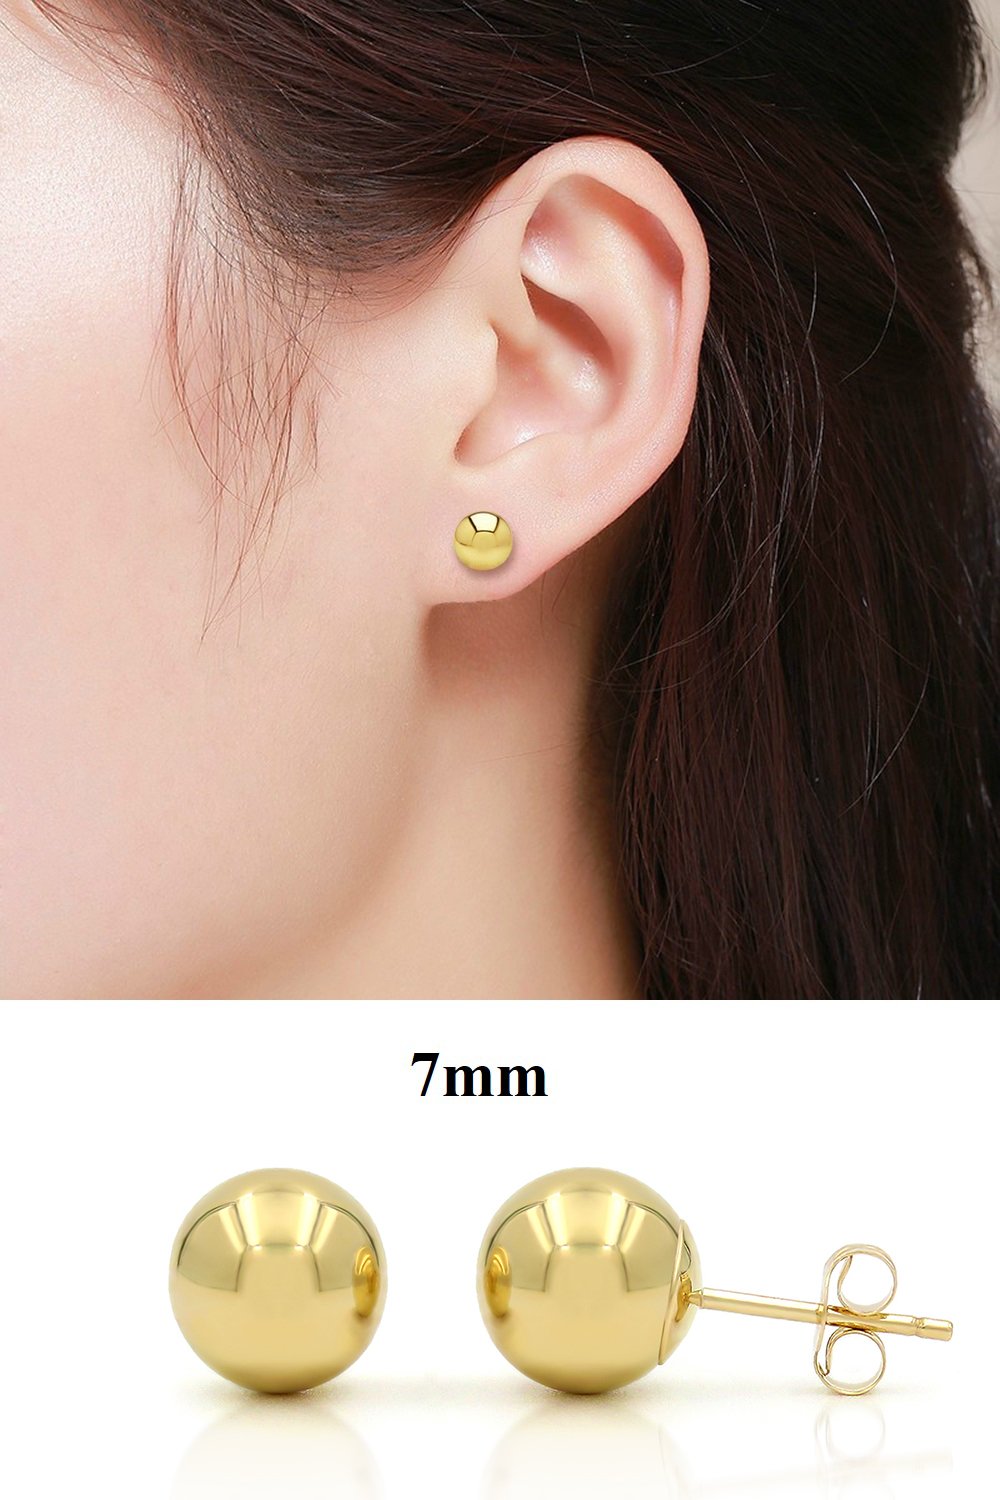 14K Gold Polished Round Ball Stud Earrings (7mm)